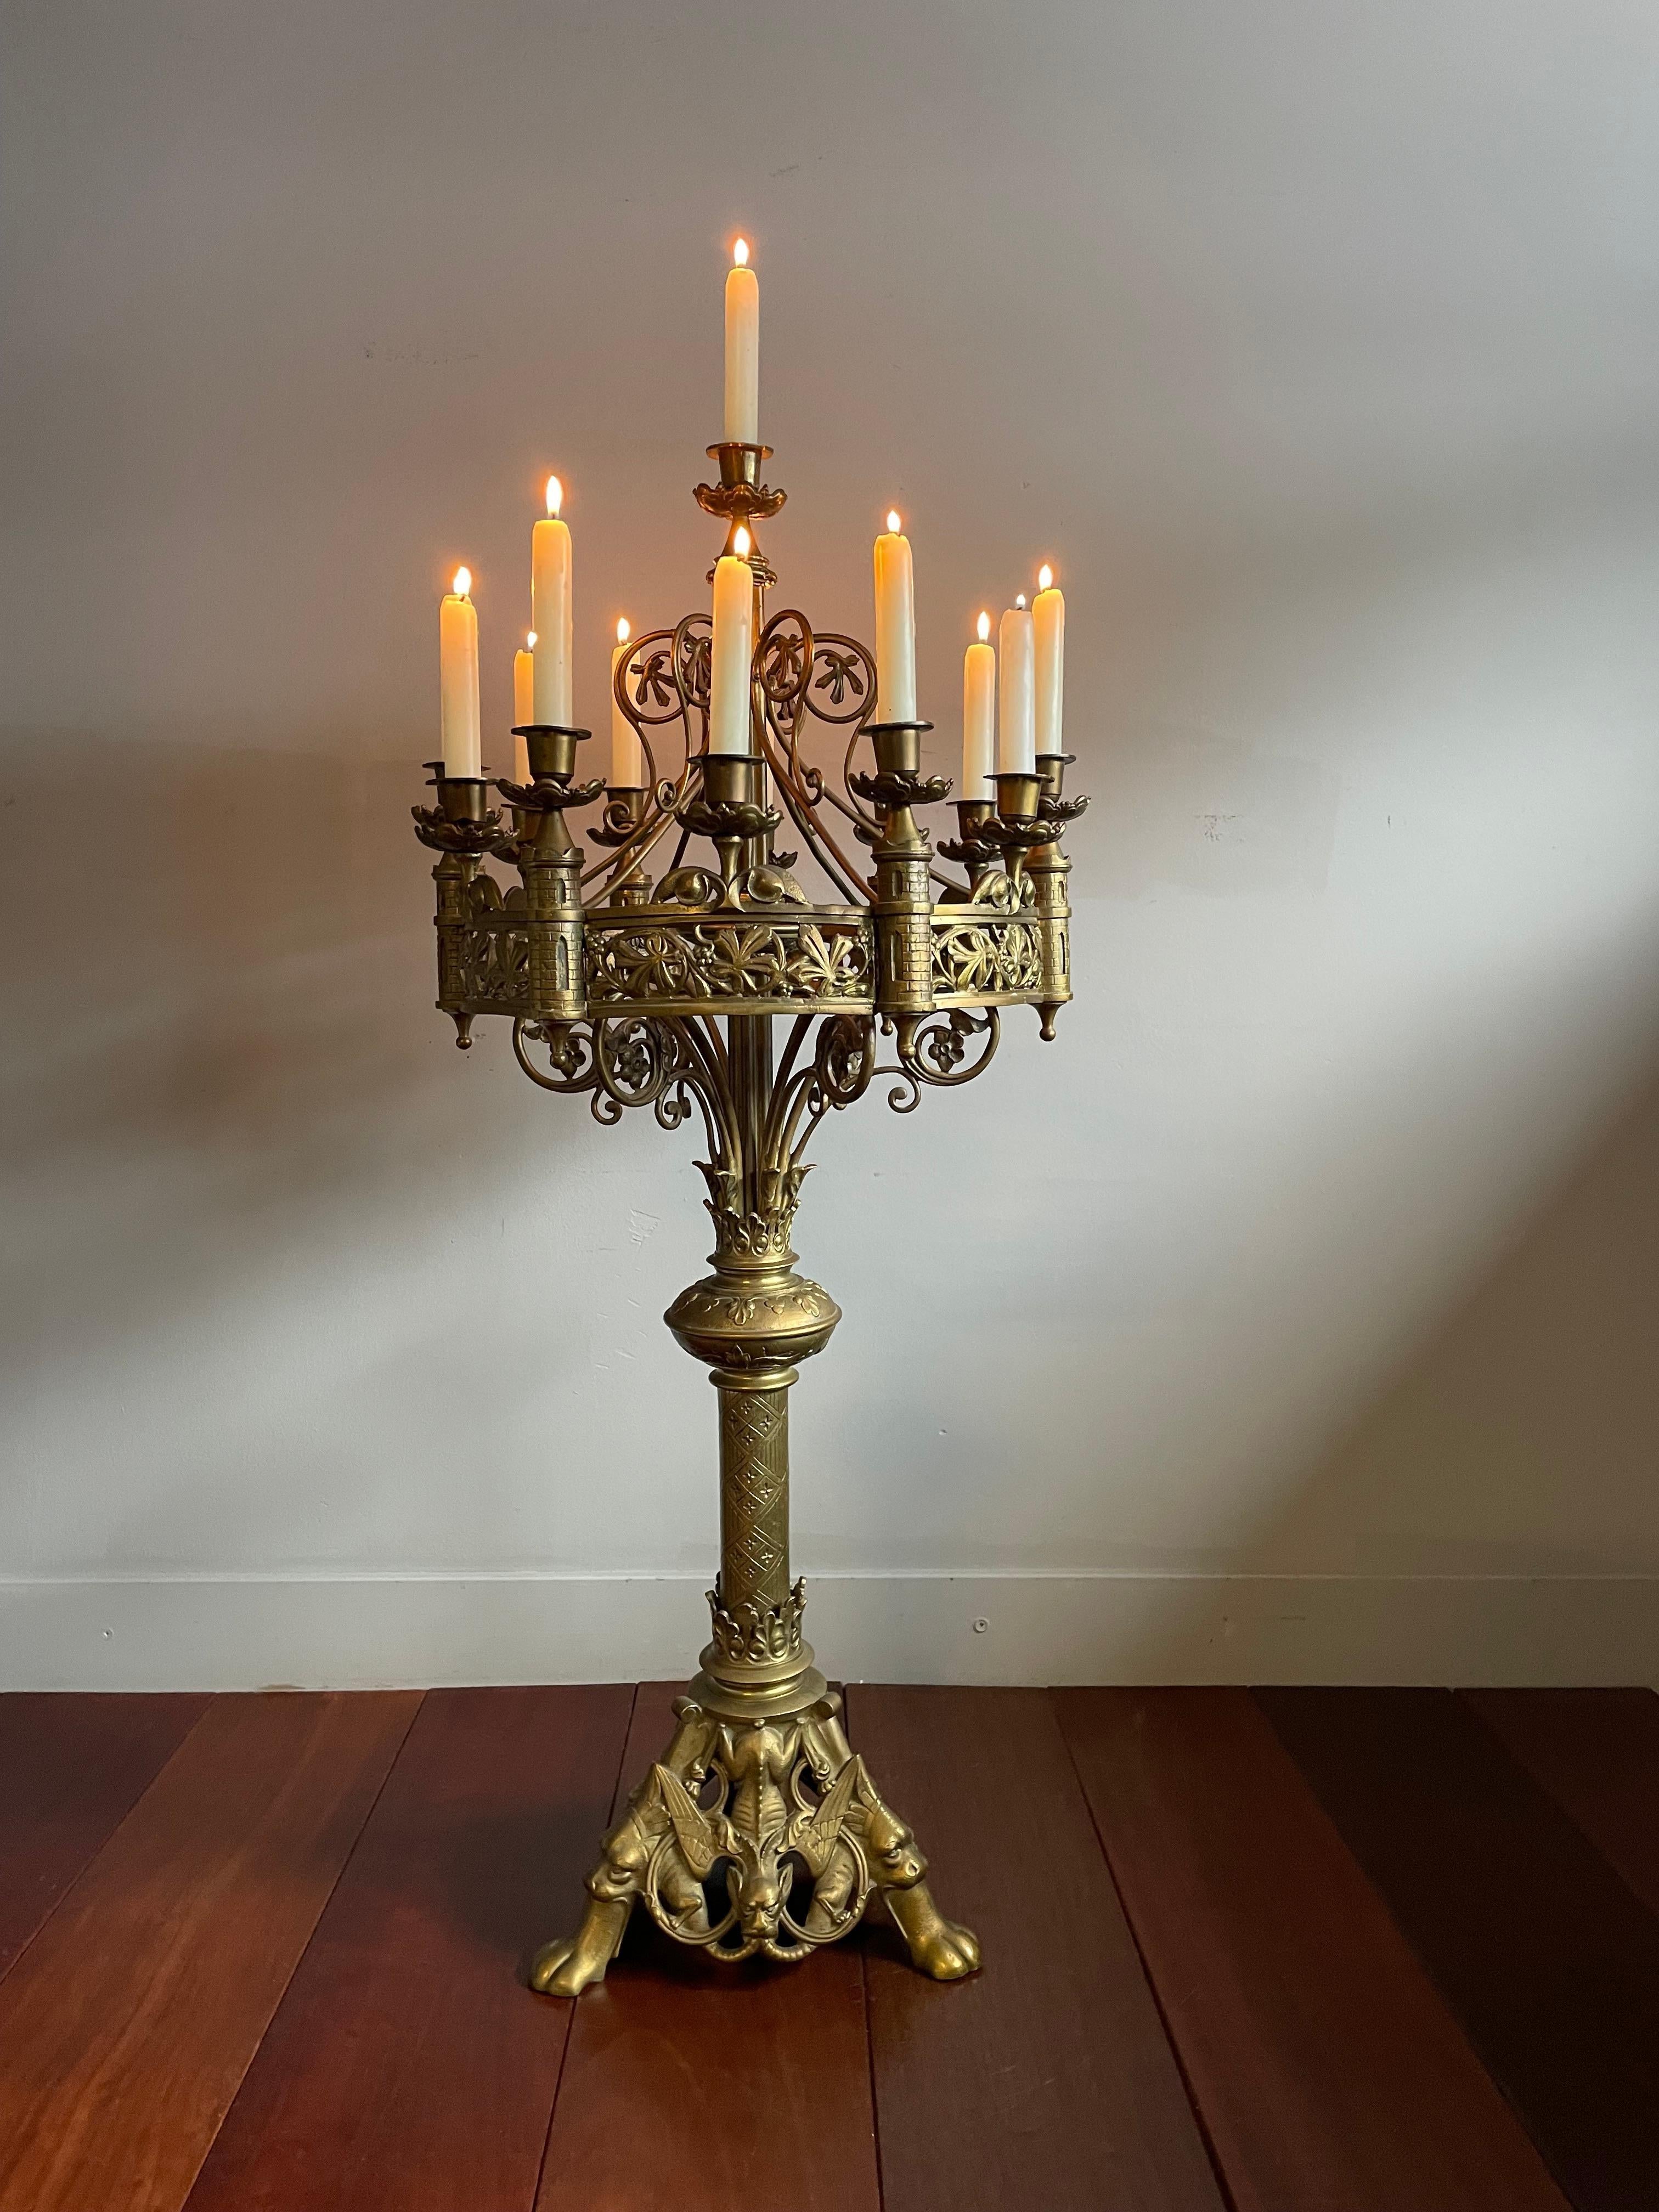 Rare and meaningful, 3 feet tall, bronze Gothic floor candle holder for thirteen candles.

This antique, Gothic Revival altar or floor candelabra for thirteen candles is another one of those antiques of which you immediately realize that it ticks